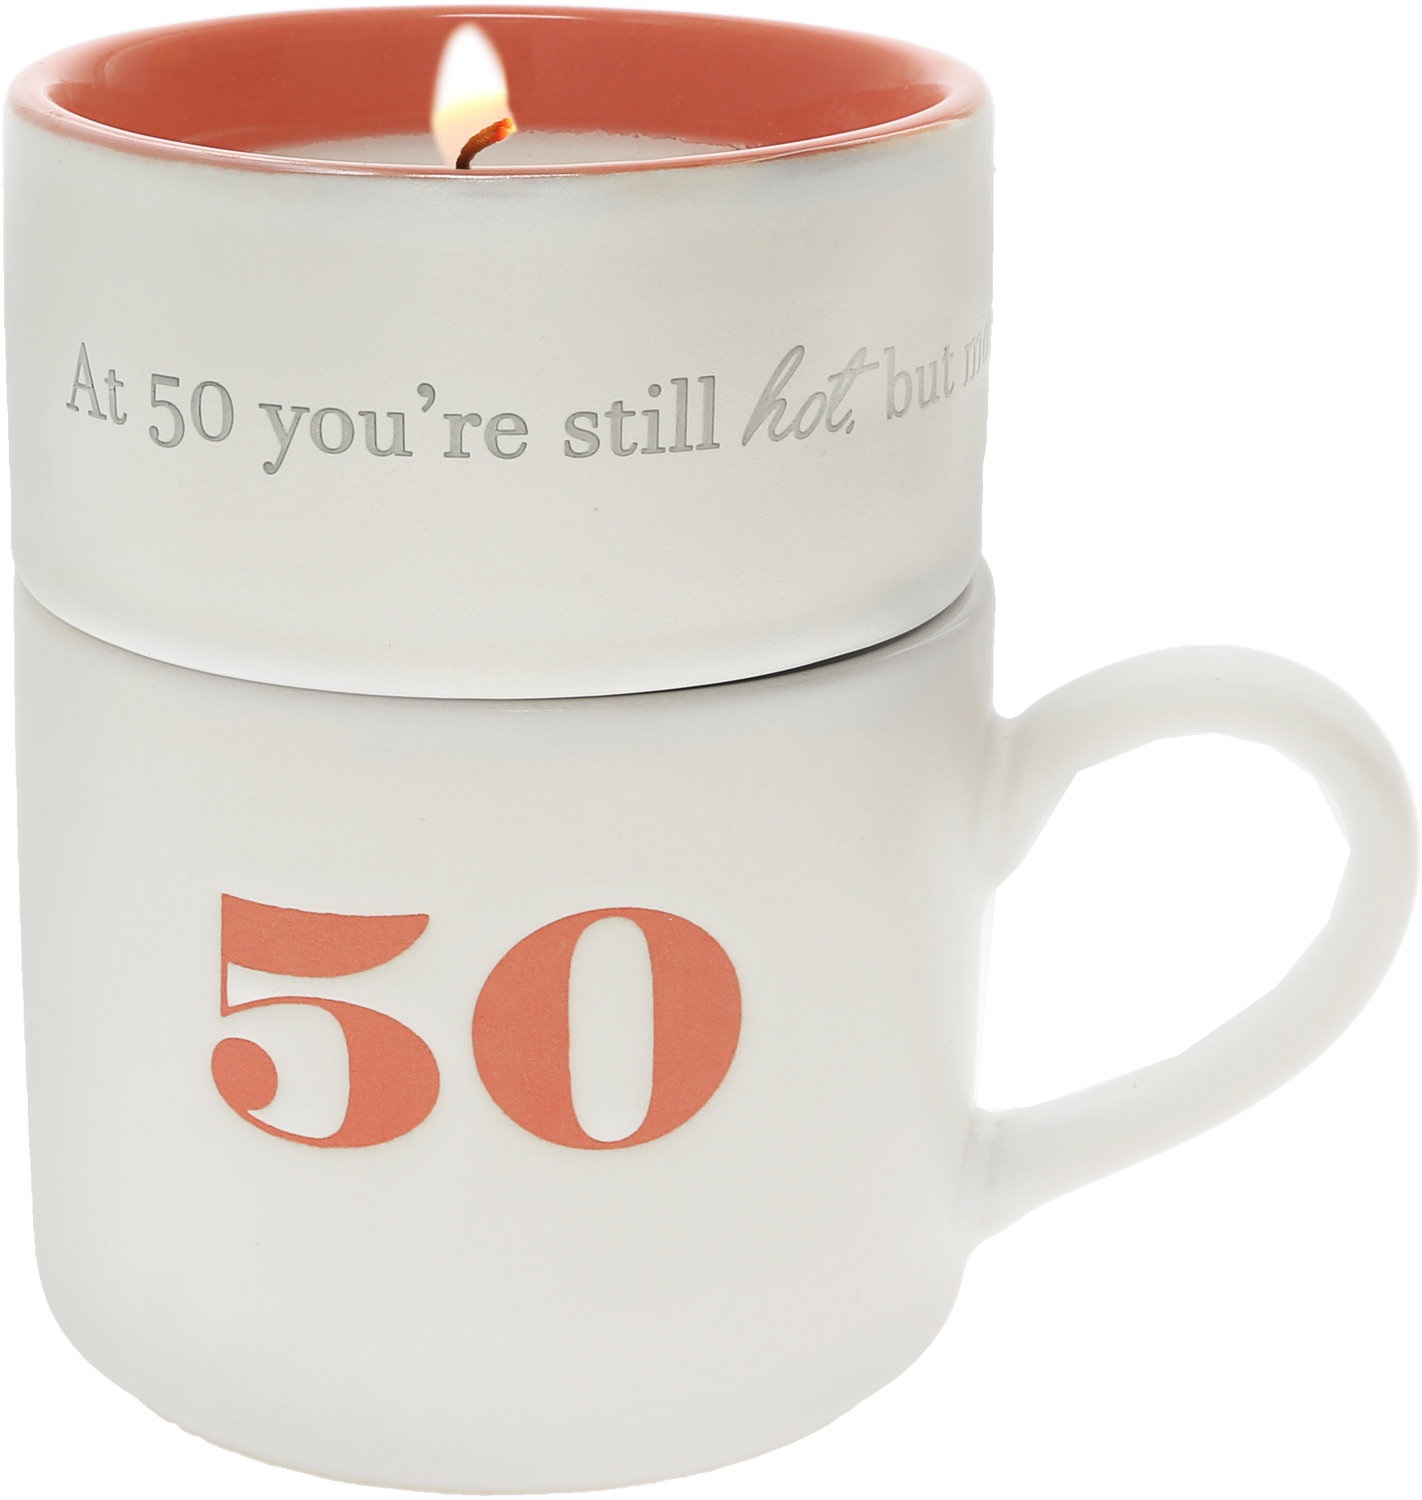 50 by Filled with Warmth - 50 - Stacking Mug and Candle Set
100% Soy Wax Scent: Tranquility